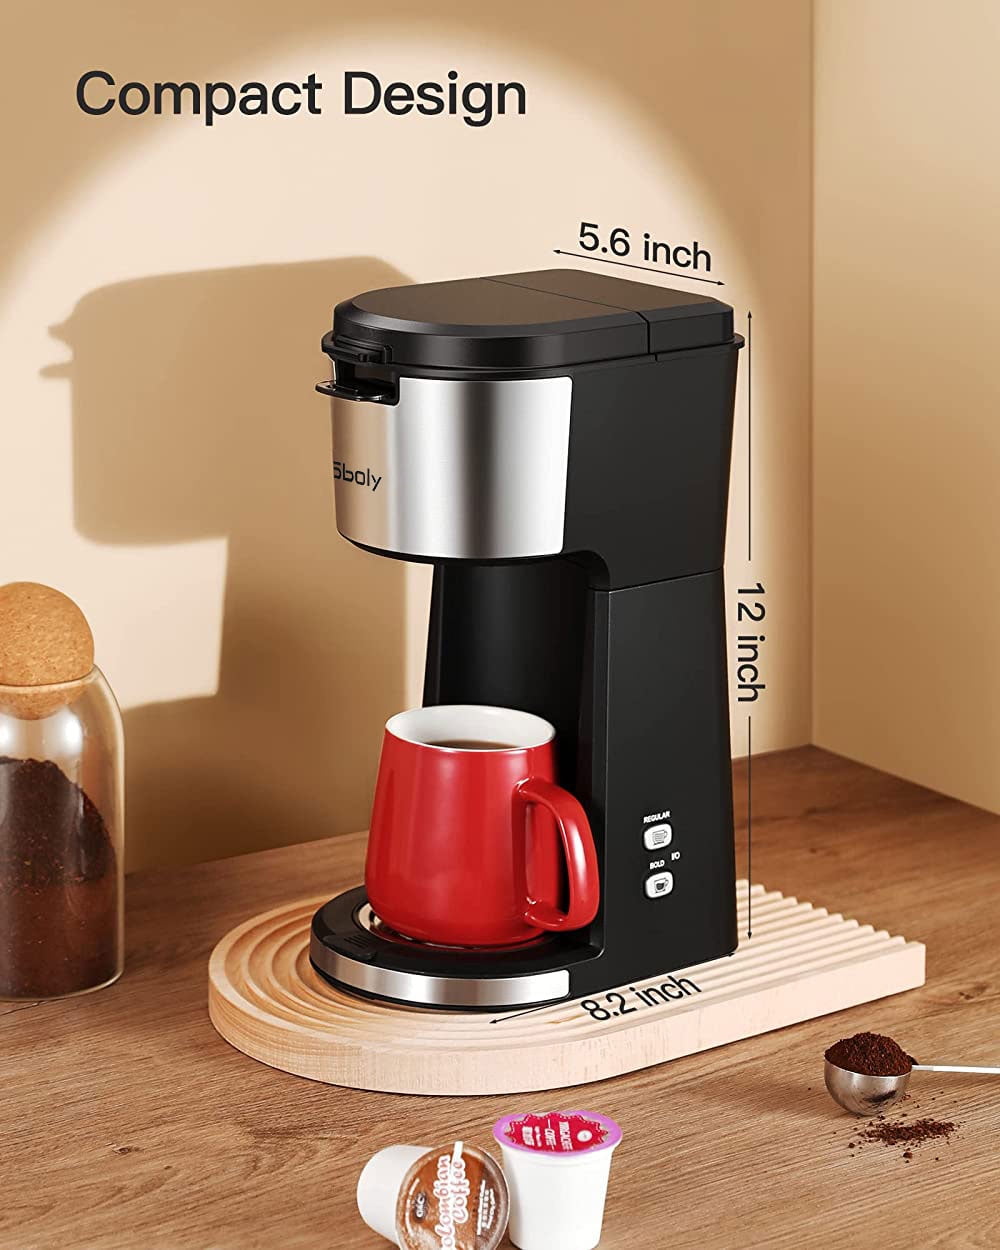  boly Single Serve Coffee Maker Machine, Grind and Brew